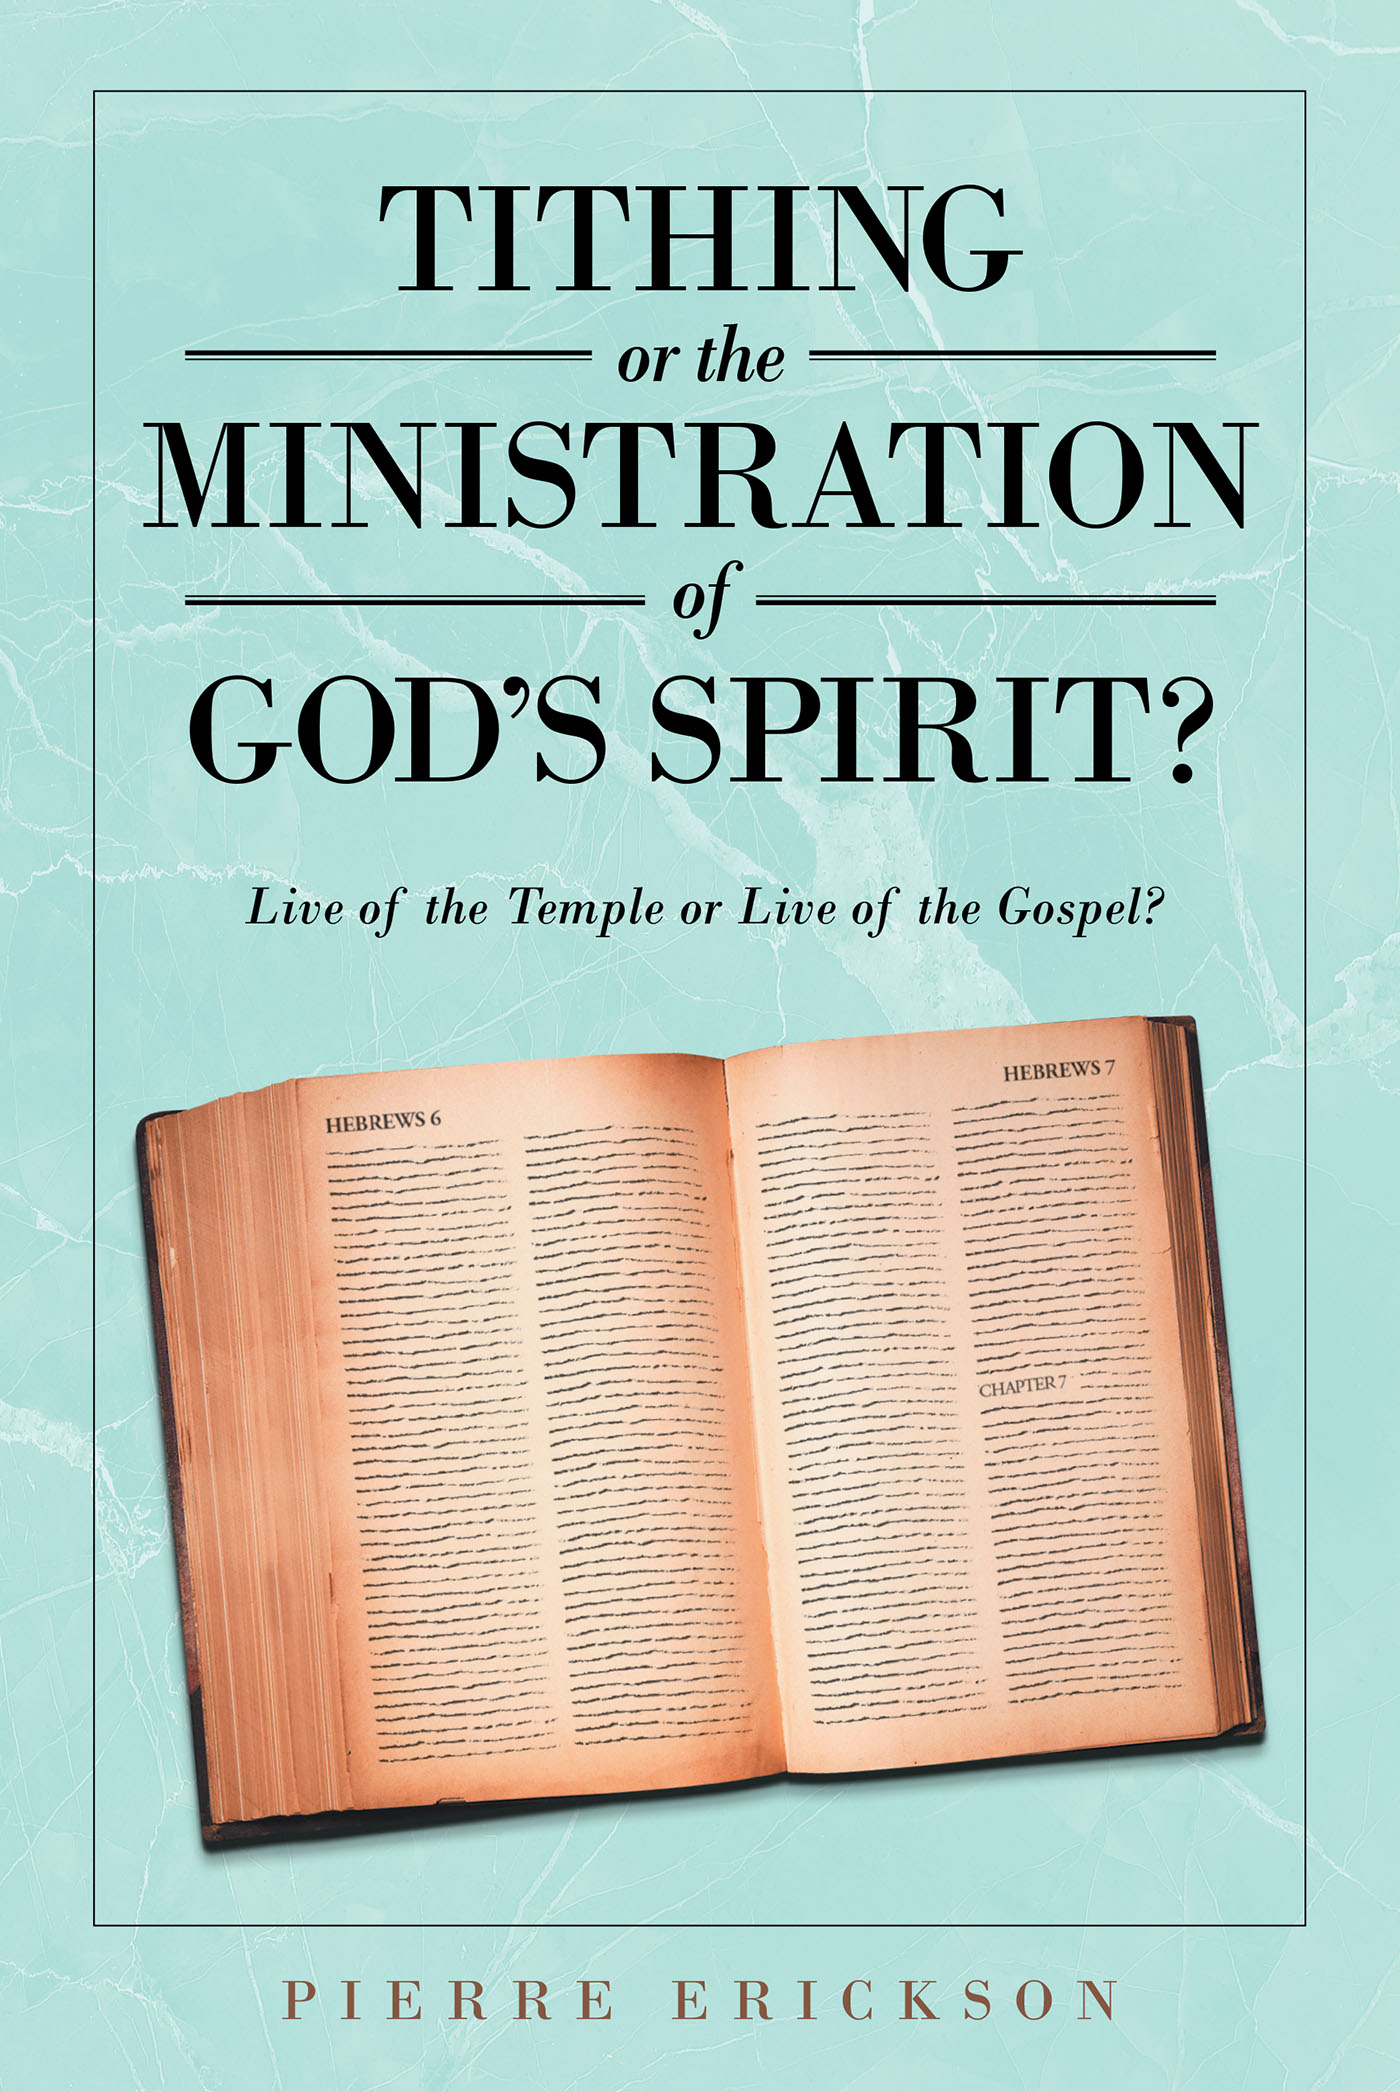 Tithing or the Ministration of God's Spirit Cover Image